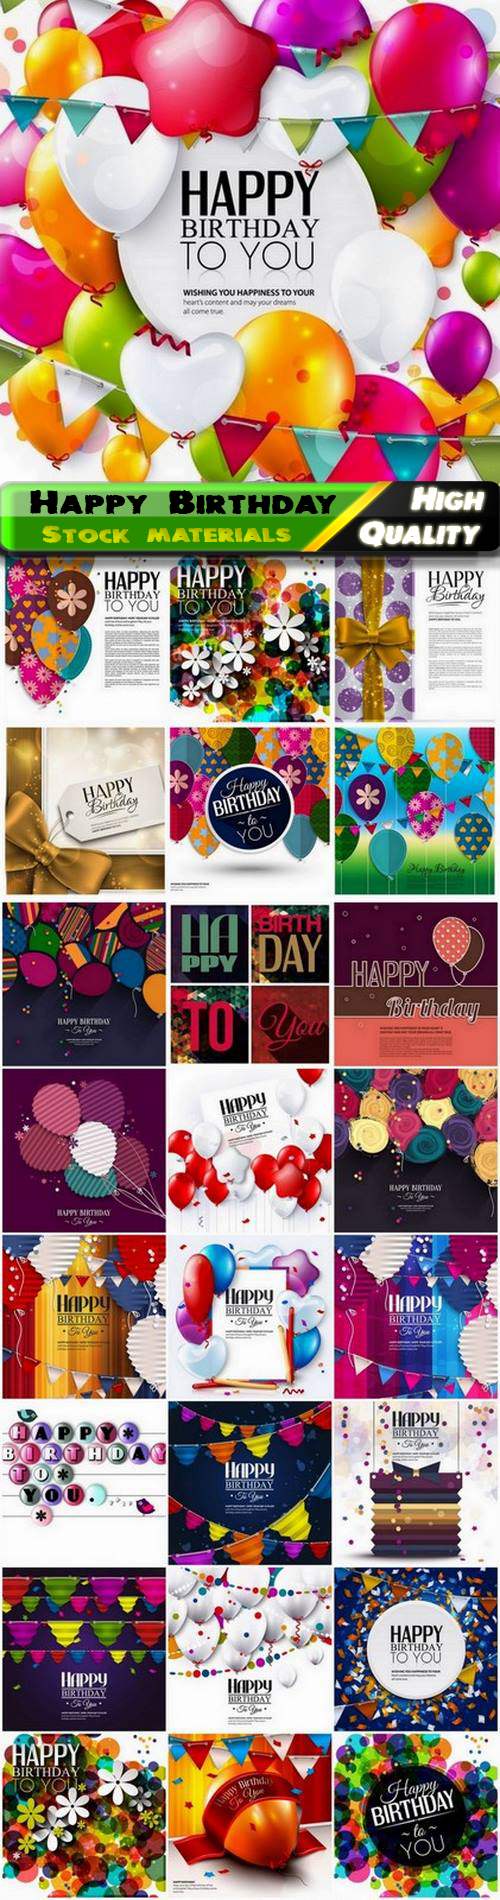 Happy Birthday holiday card with balloons flags confetti - 25 Eps